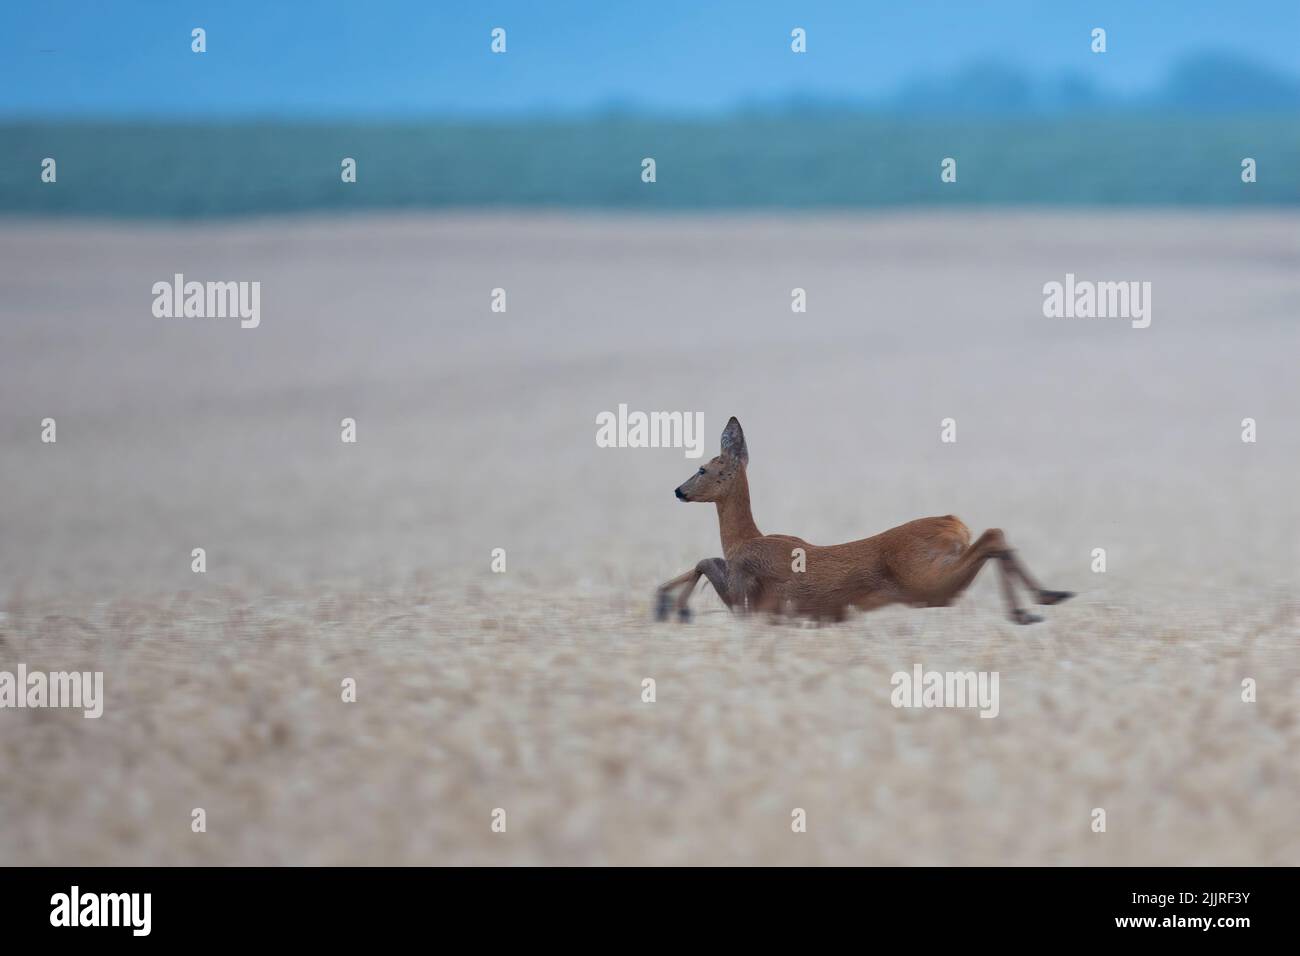 A beautiful view of a deer running in a field Stock Photo